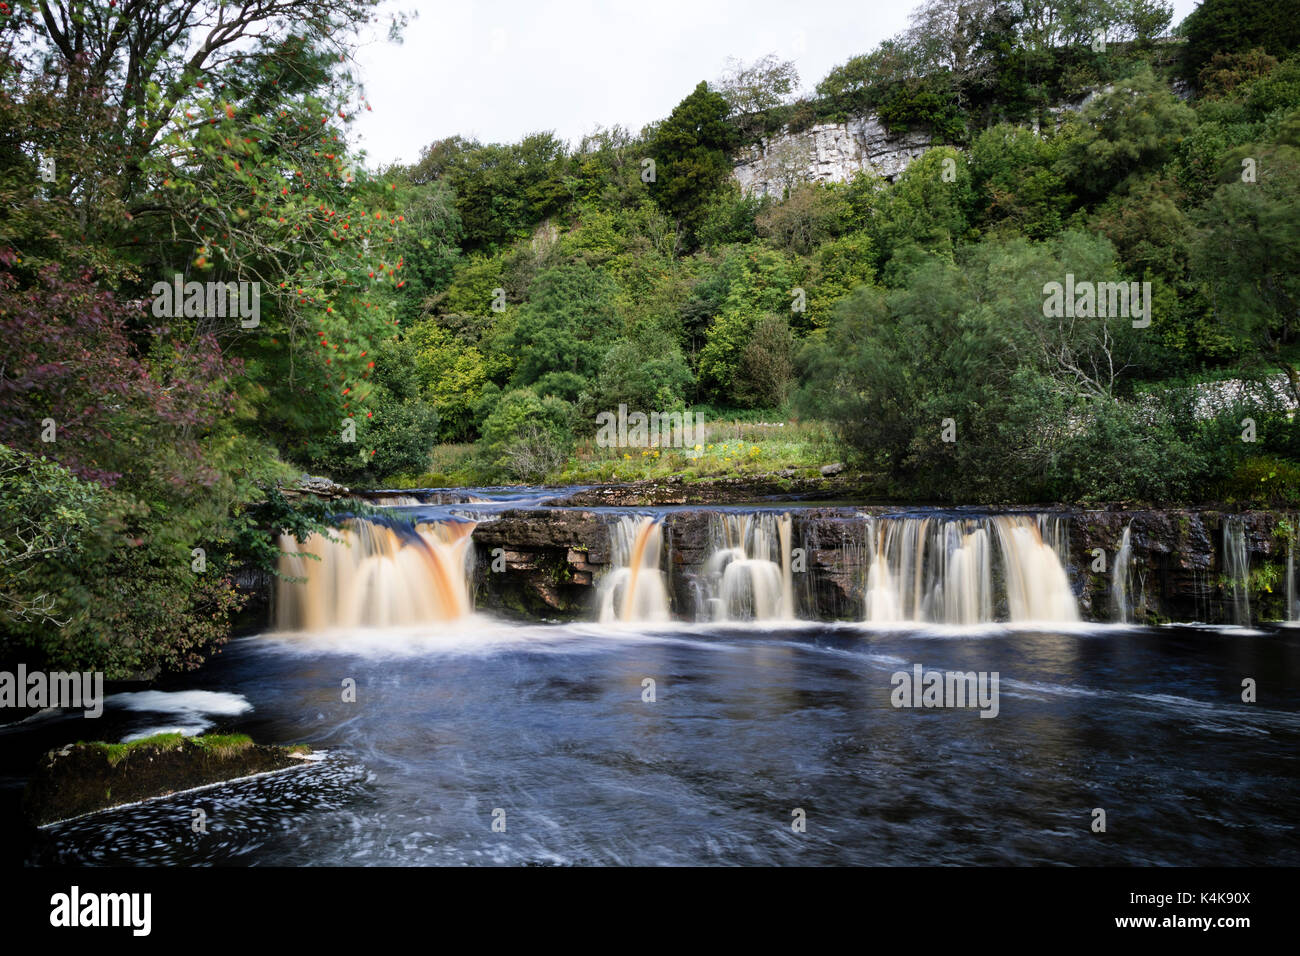 River Swale, Keld, Yorkshire Dales.  Wednesday 6th September 2017. UK Weather.  After a damp start the sun breaks through to illuminate Wain Wath Falls on the River Swale near the village of Keld. Credit: David Forster/Alamy Live News. Stock Photo